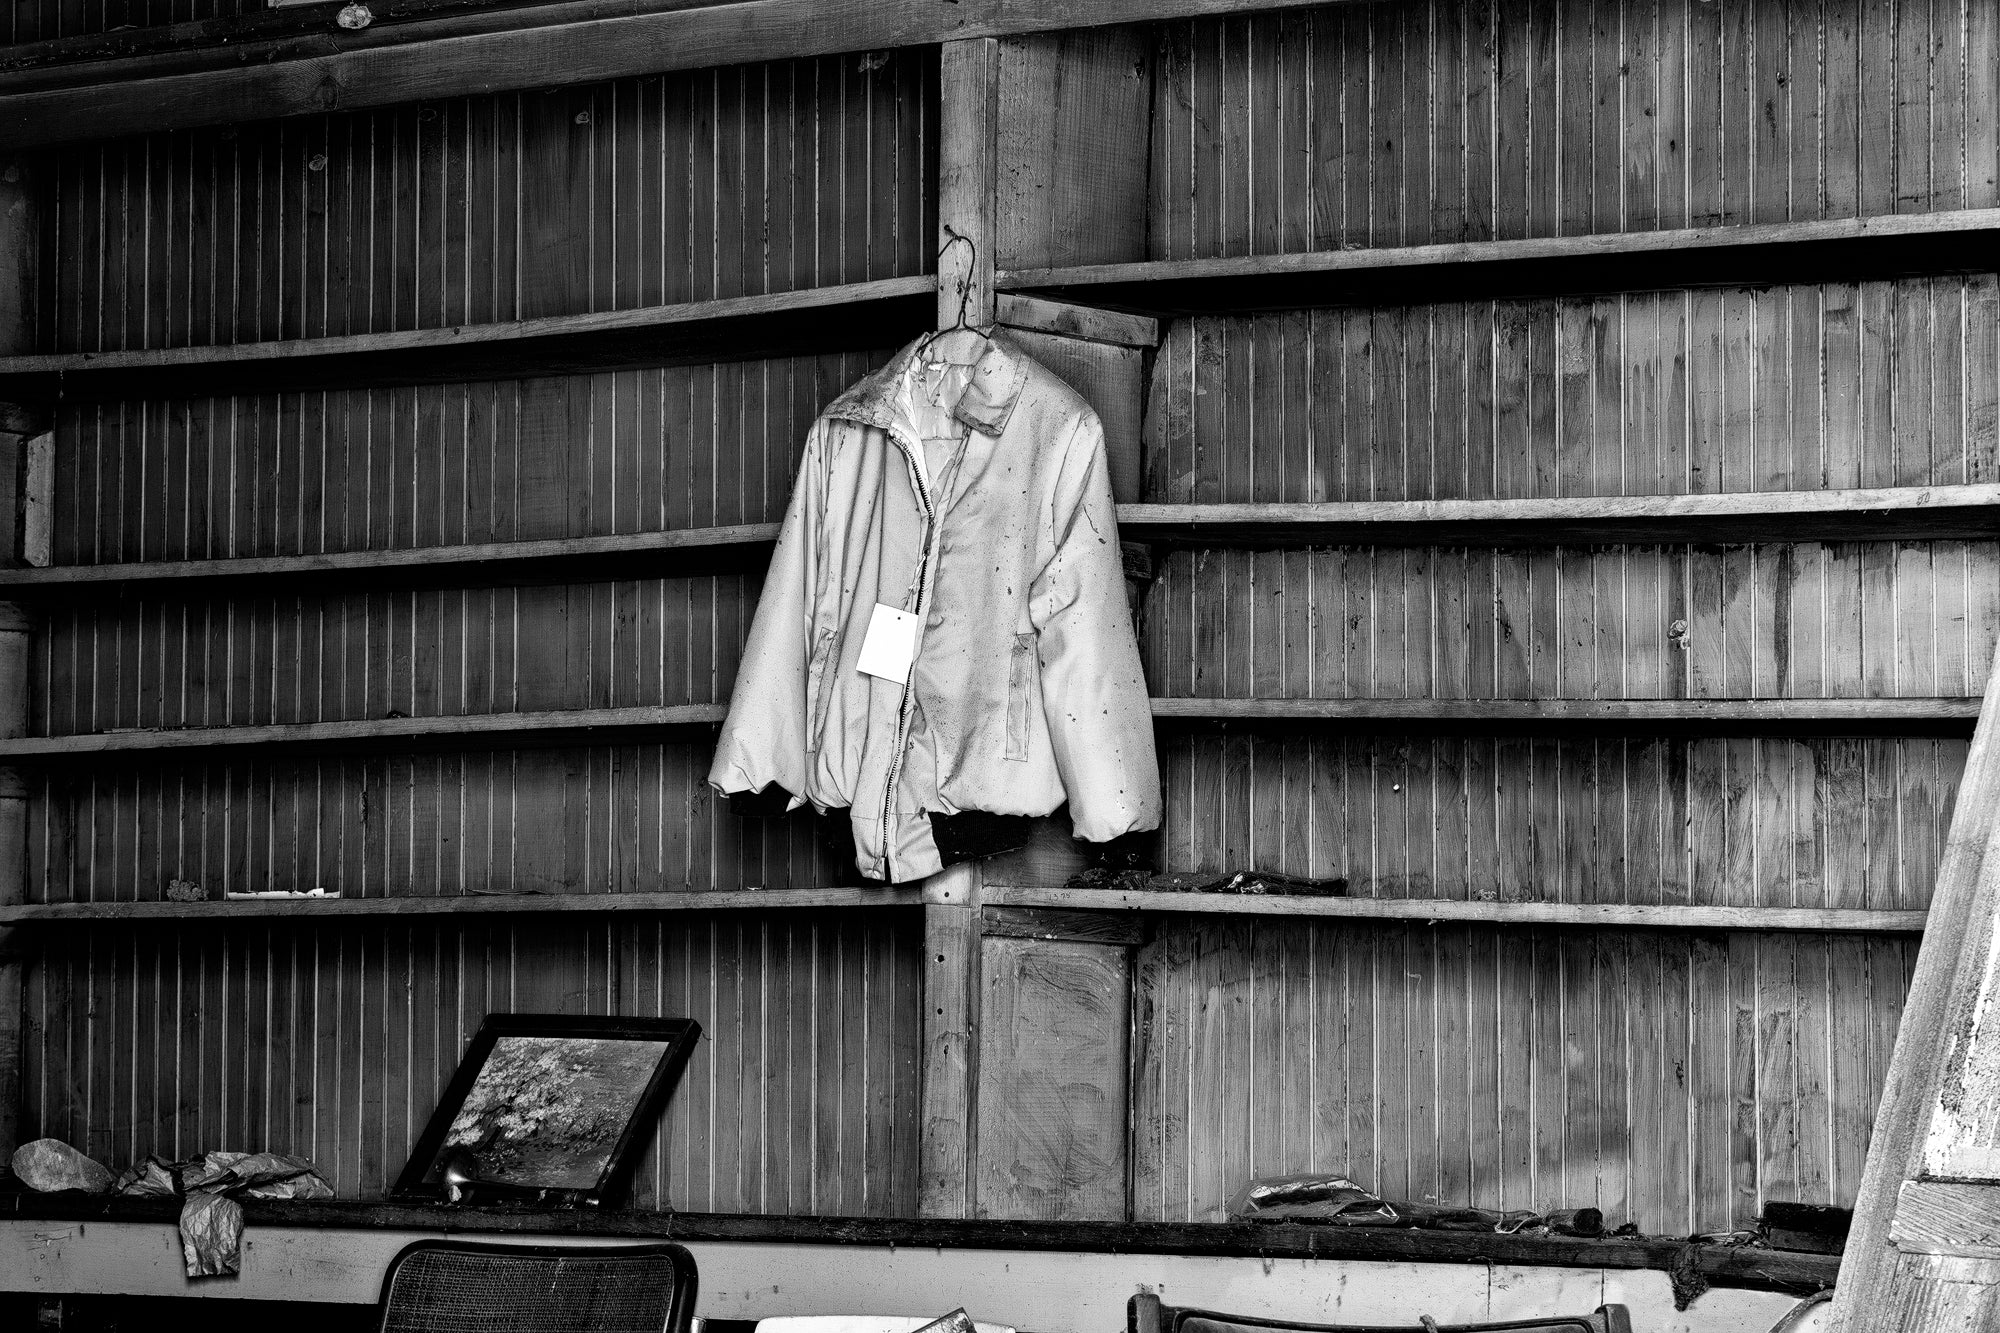 Blue Jacket with Sale Tag Hanging in an Abandoned Old Country Store. Black and White Photograph by Keith Dotson. Click to buy a fine art print.